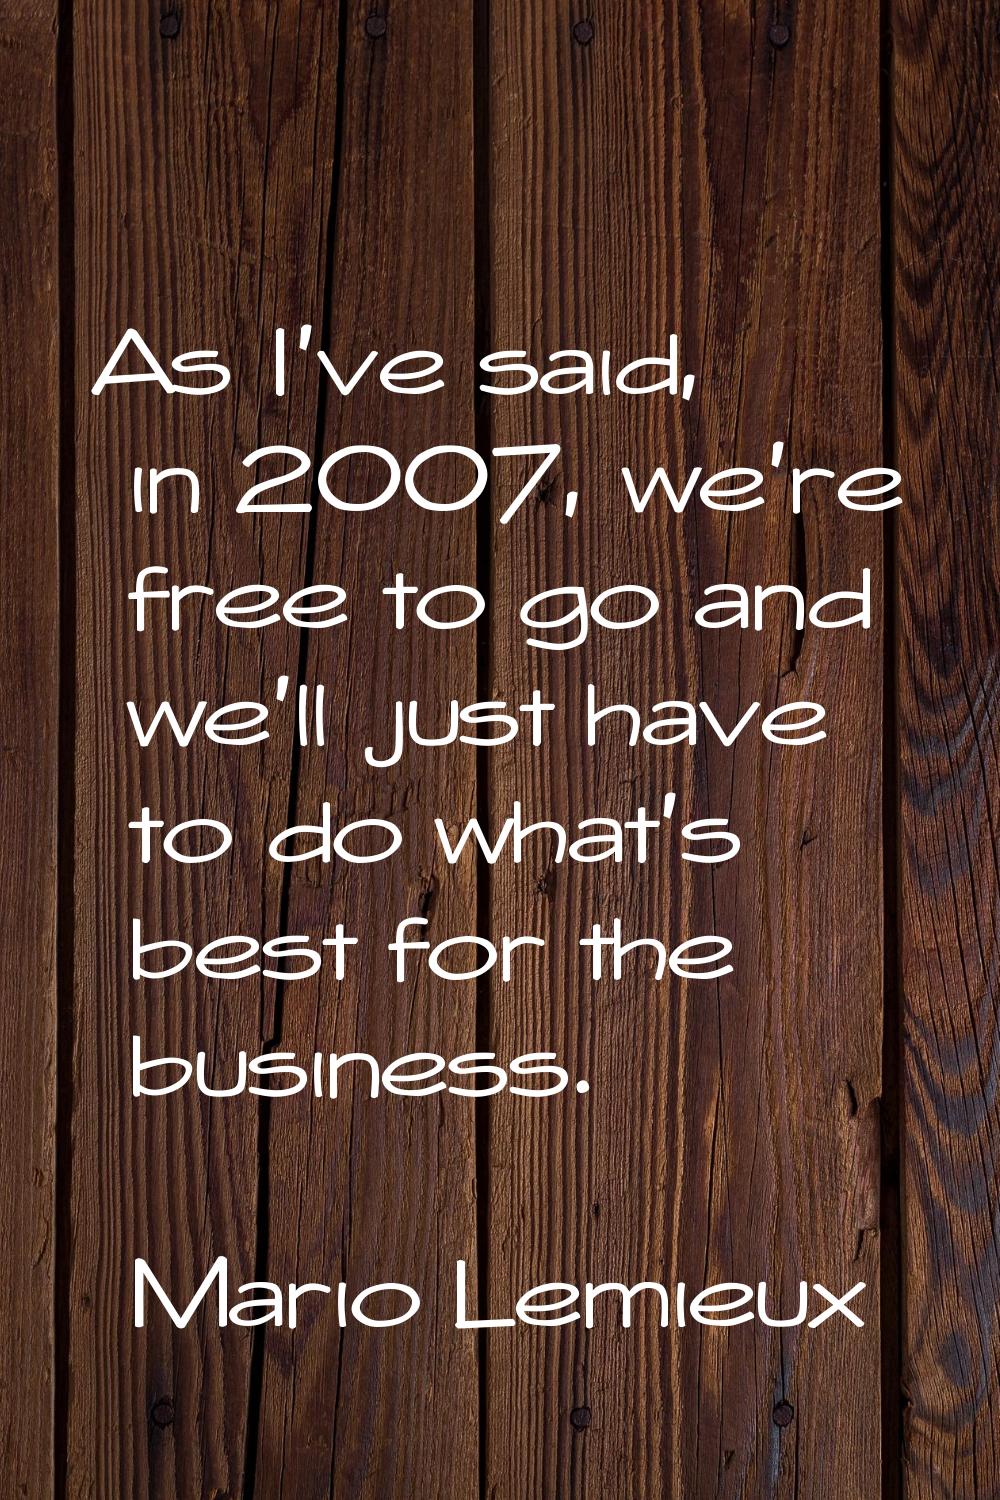 As I've said, in 2007, we're free to go and we'll just have to do what's best for the business.